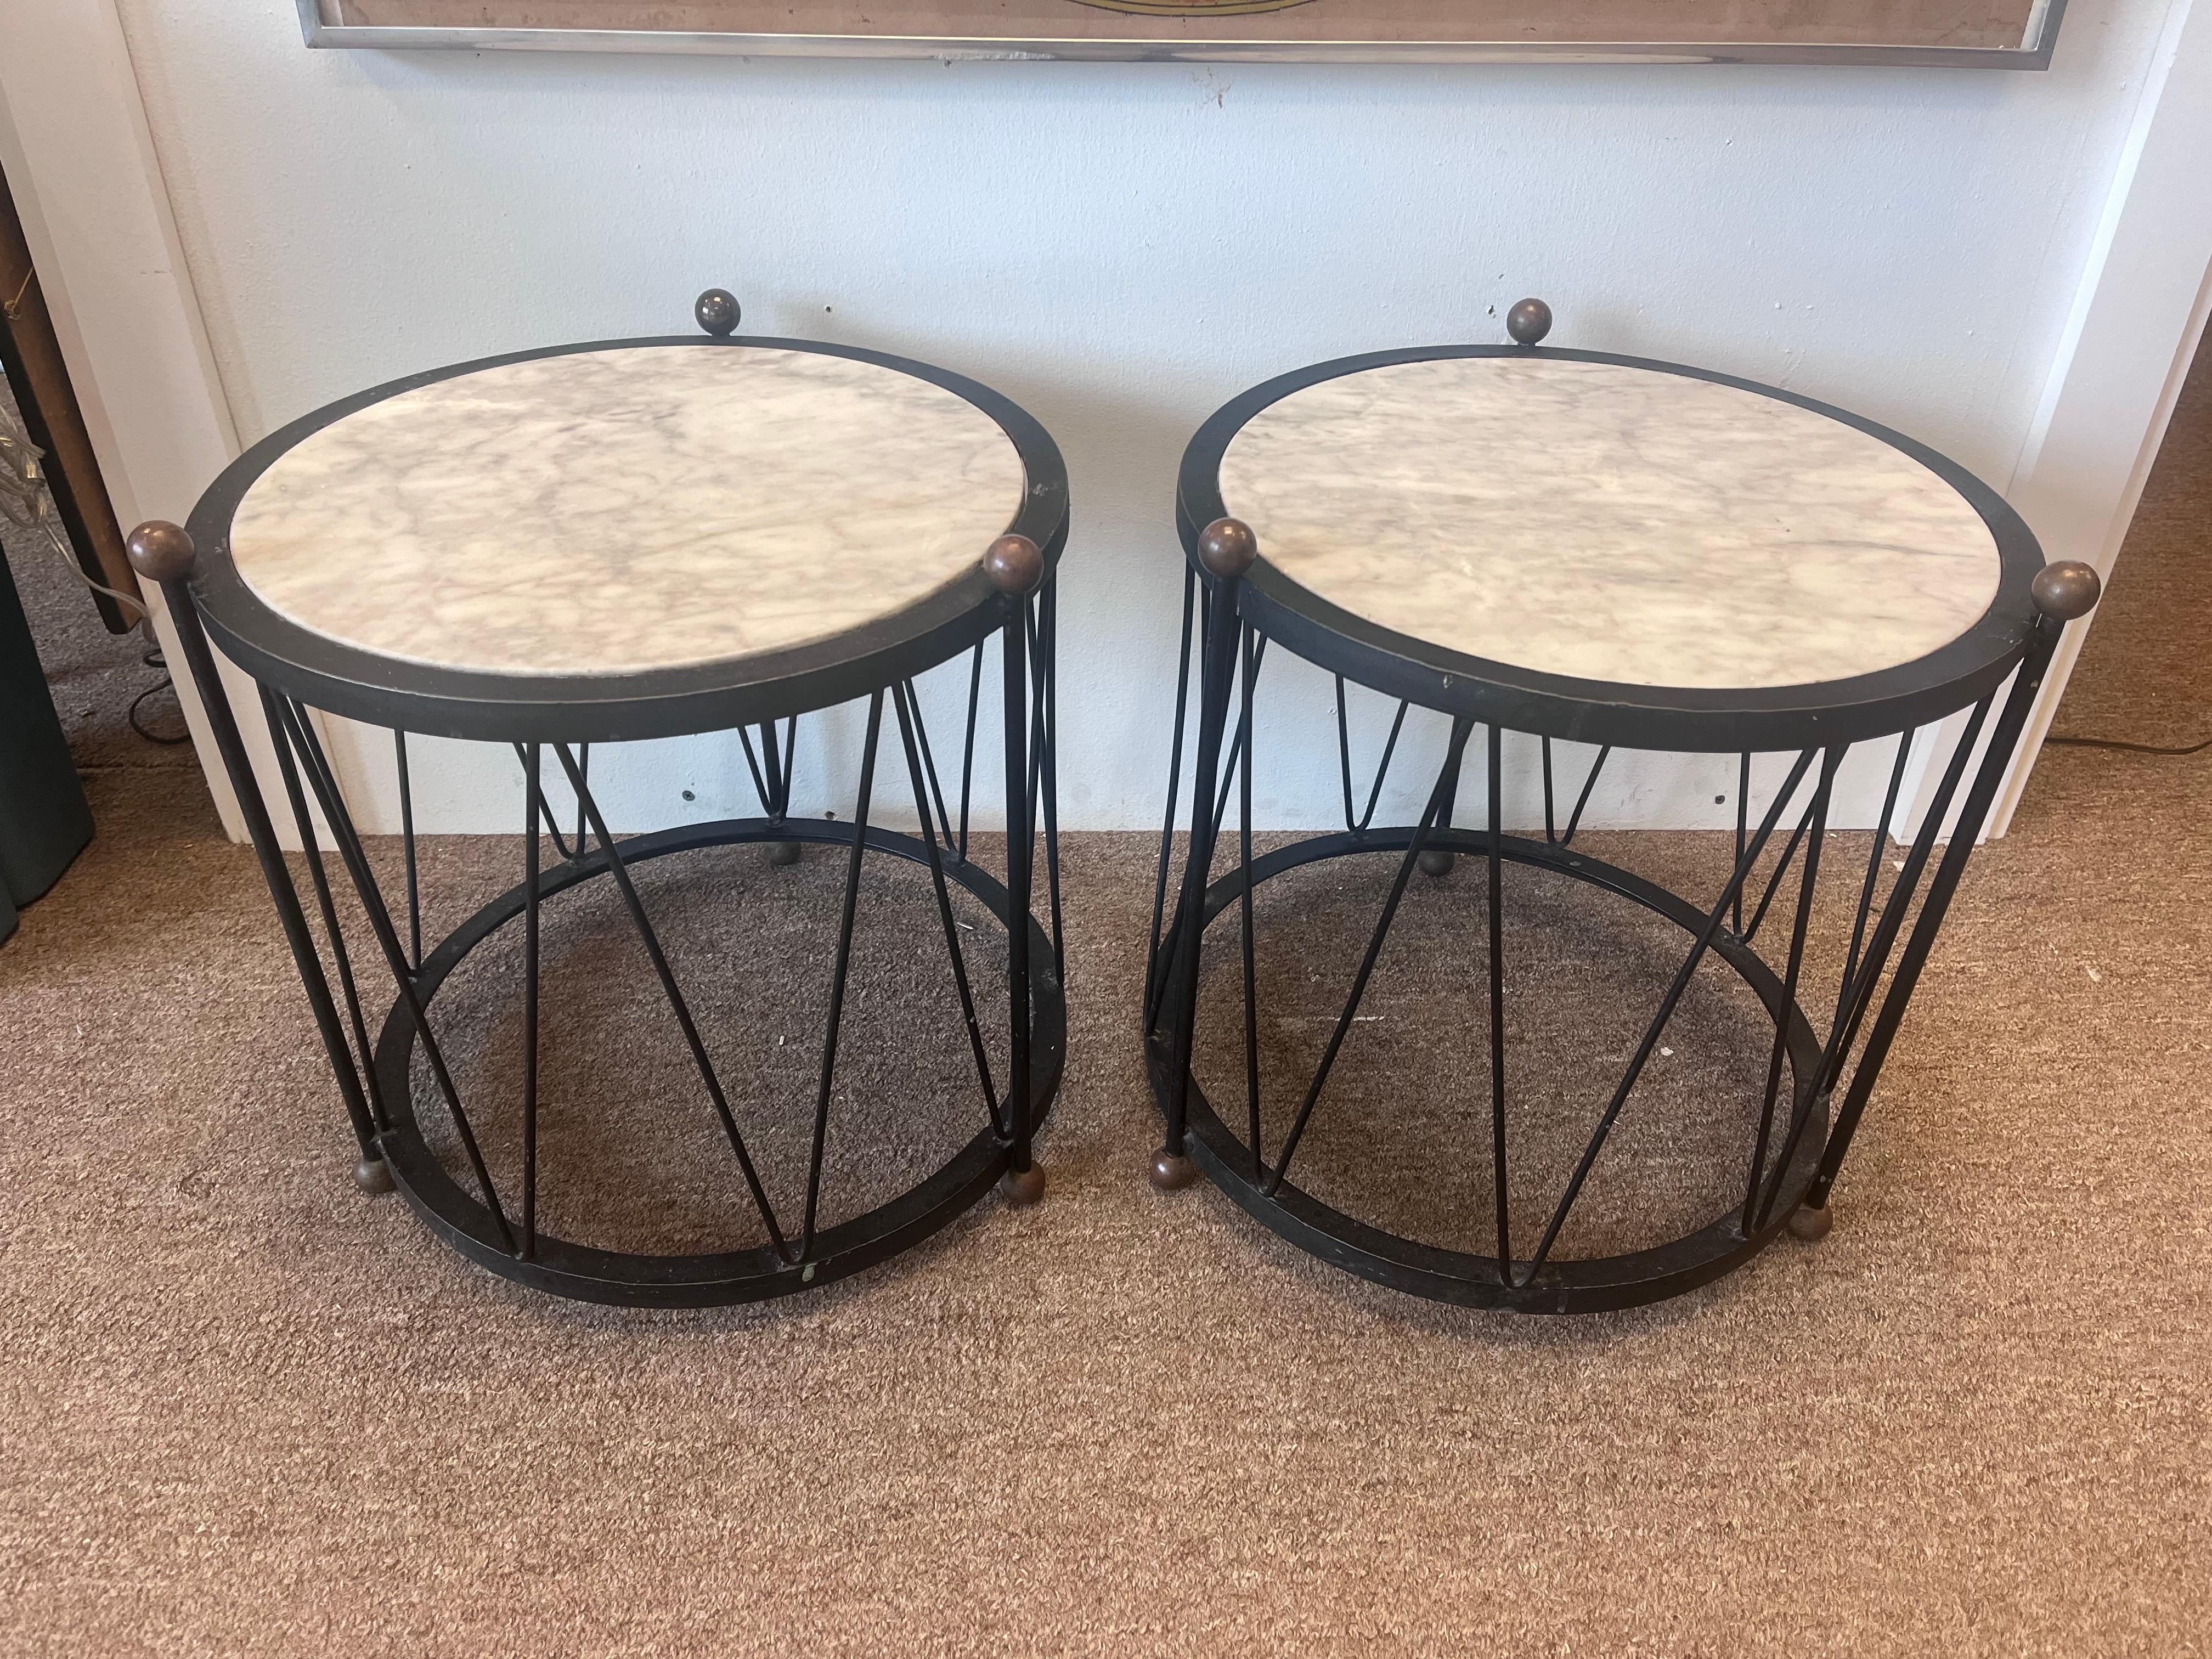 A pair of mid 20th century Italian marble and iron drum tables. The pair of tables features a thick, round white marble insert that is marked ITALY on the underside. The black iron bases have a wide banded rim and foot on the top and bottom as well